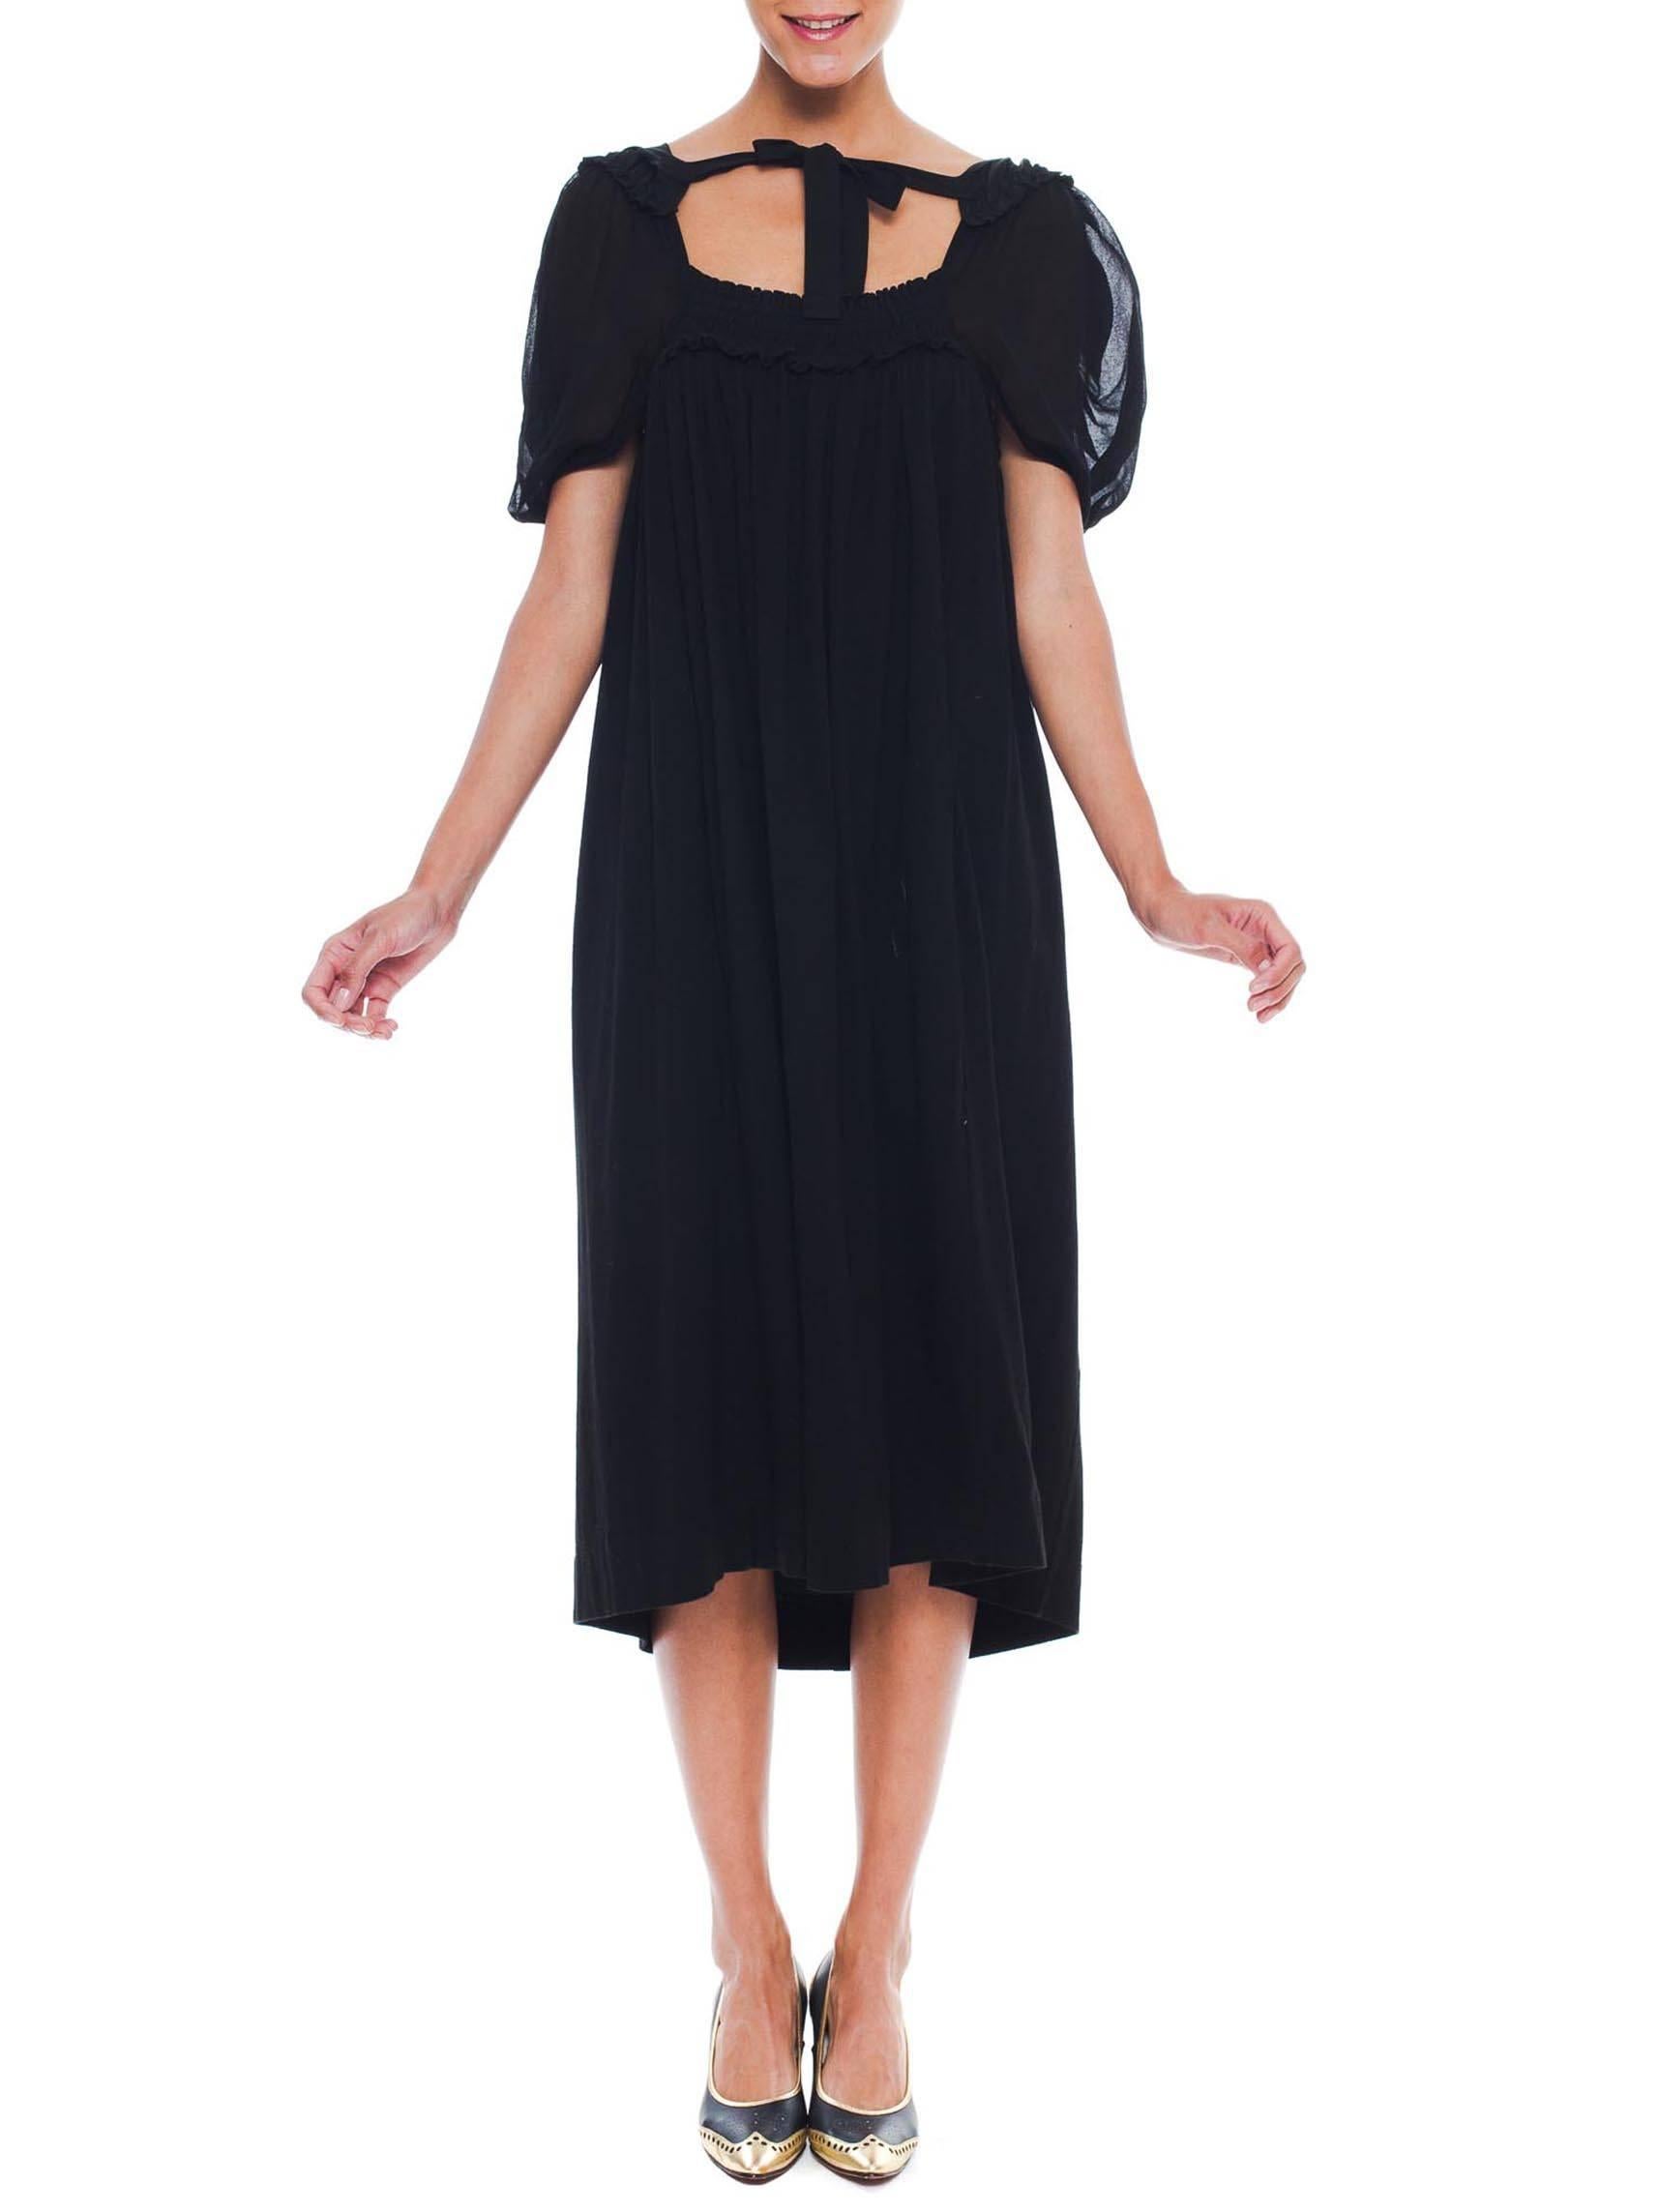 Cotton jersey and rayon crepe chiffon have been draped, pleated, and pulled together into an artful arrangement in this dress from Comme des Garcons. Cut with a free size the dress is comfortably flattering and easy to wear. The cut out back adds